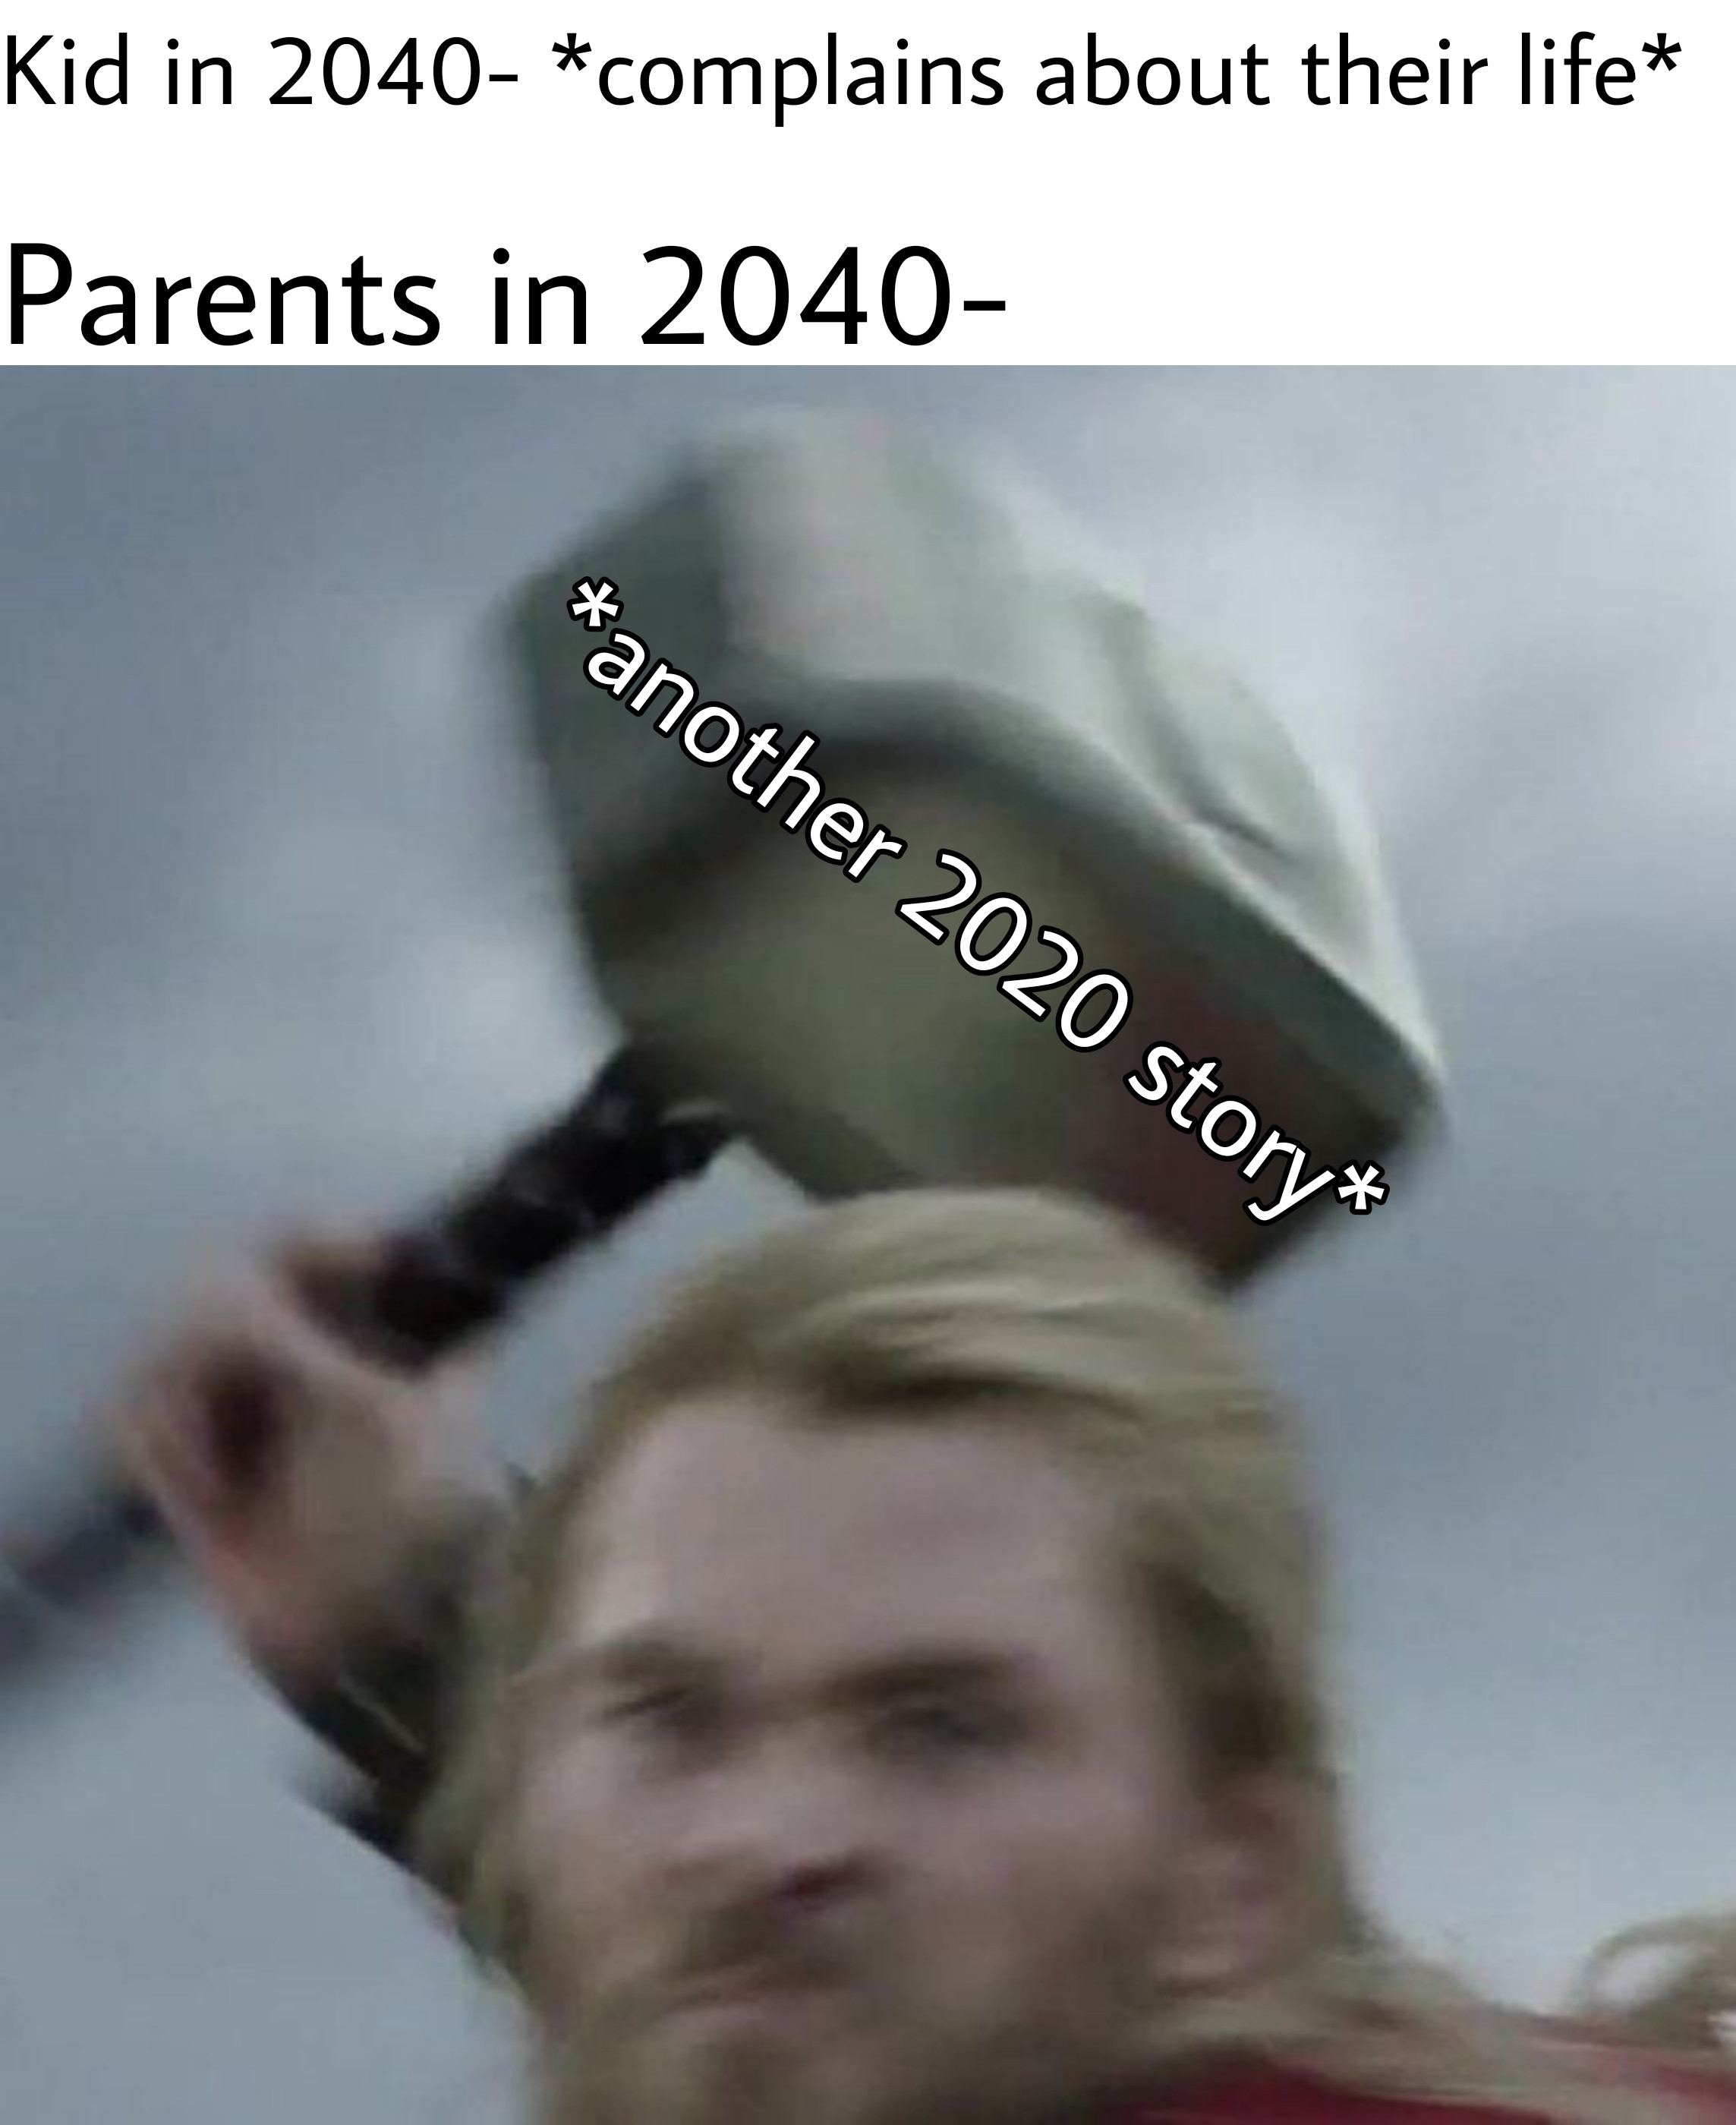 funny memes - Kid in 2040 complains about their life Parents in 2040 another 2020 story